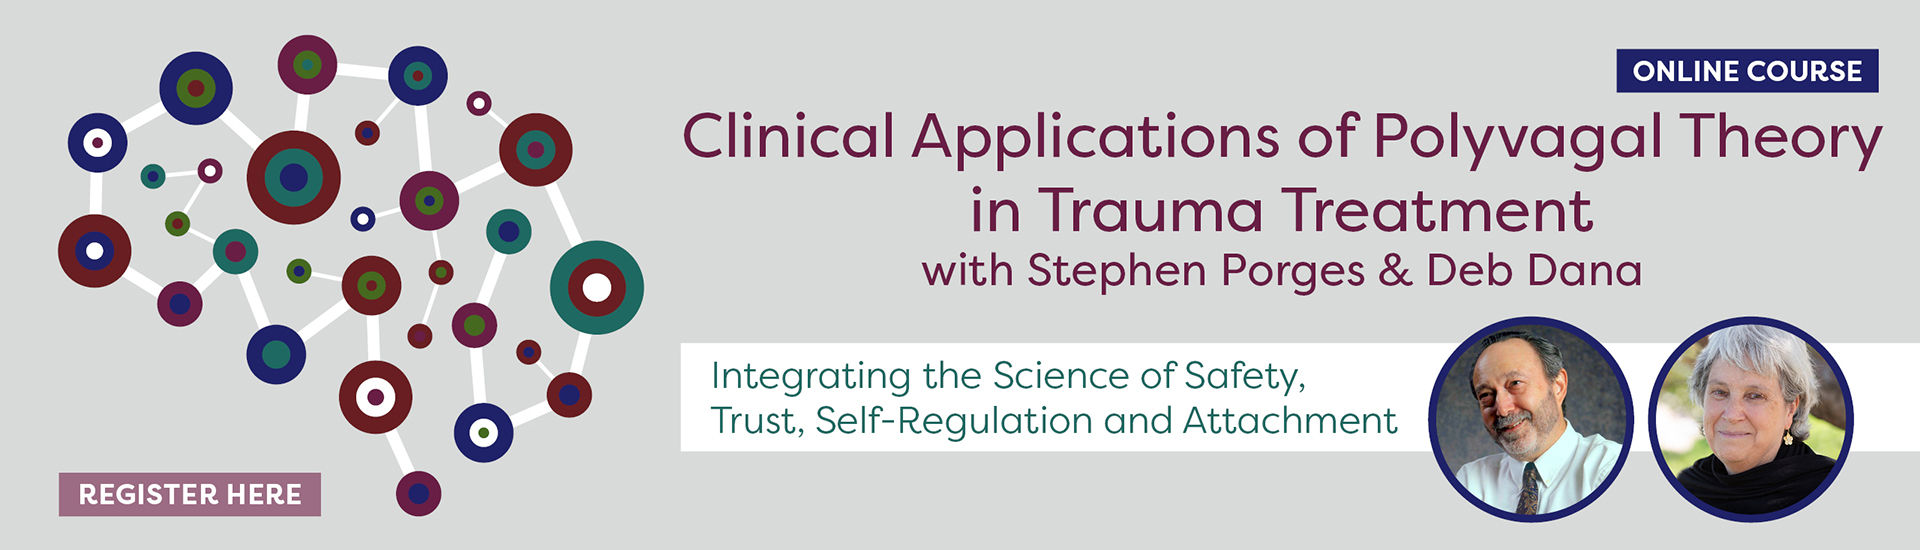 Clinical Applications of Polyvagal Theory in Trauma Treatment